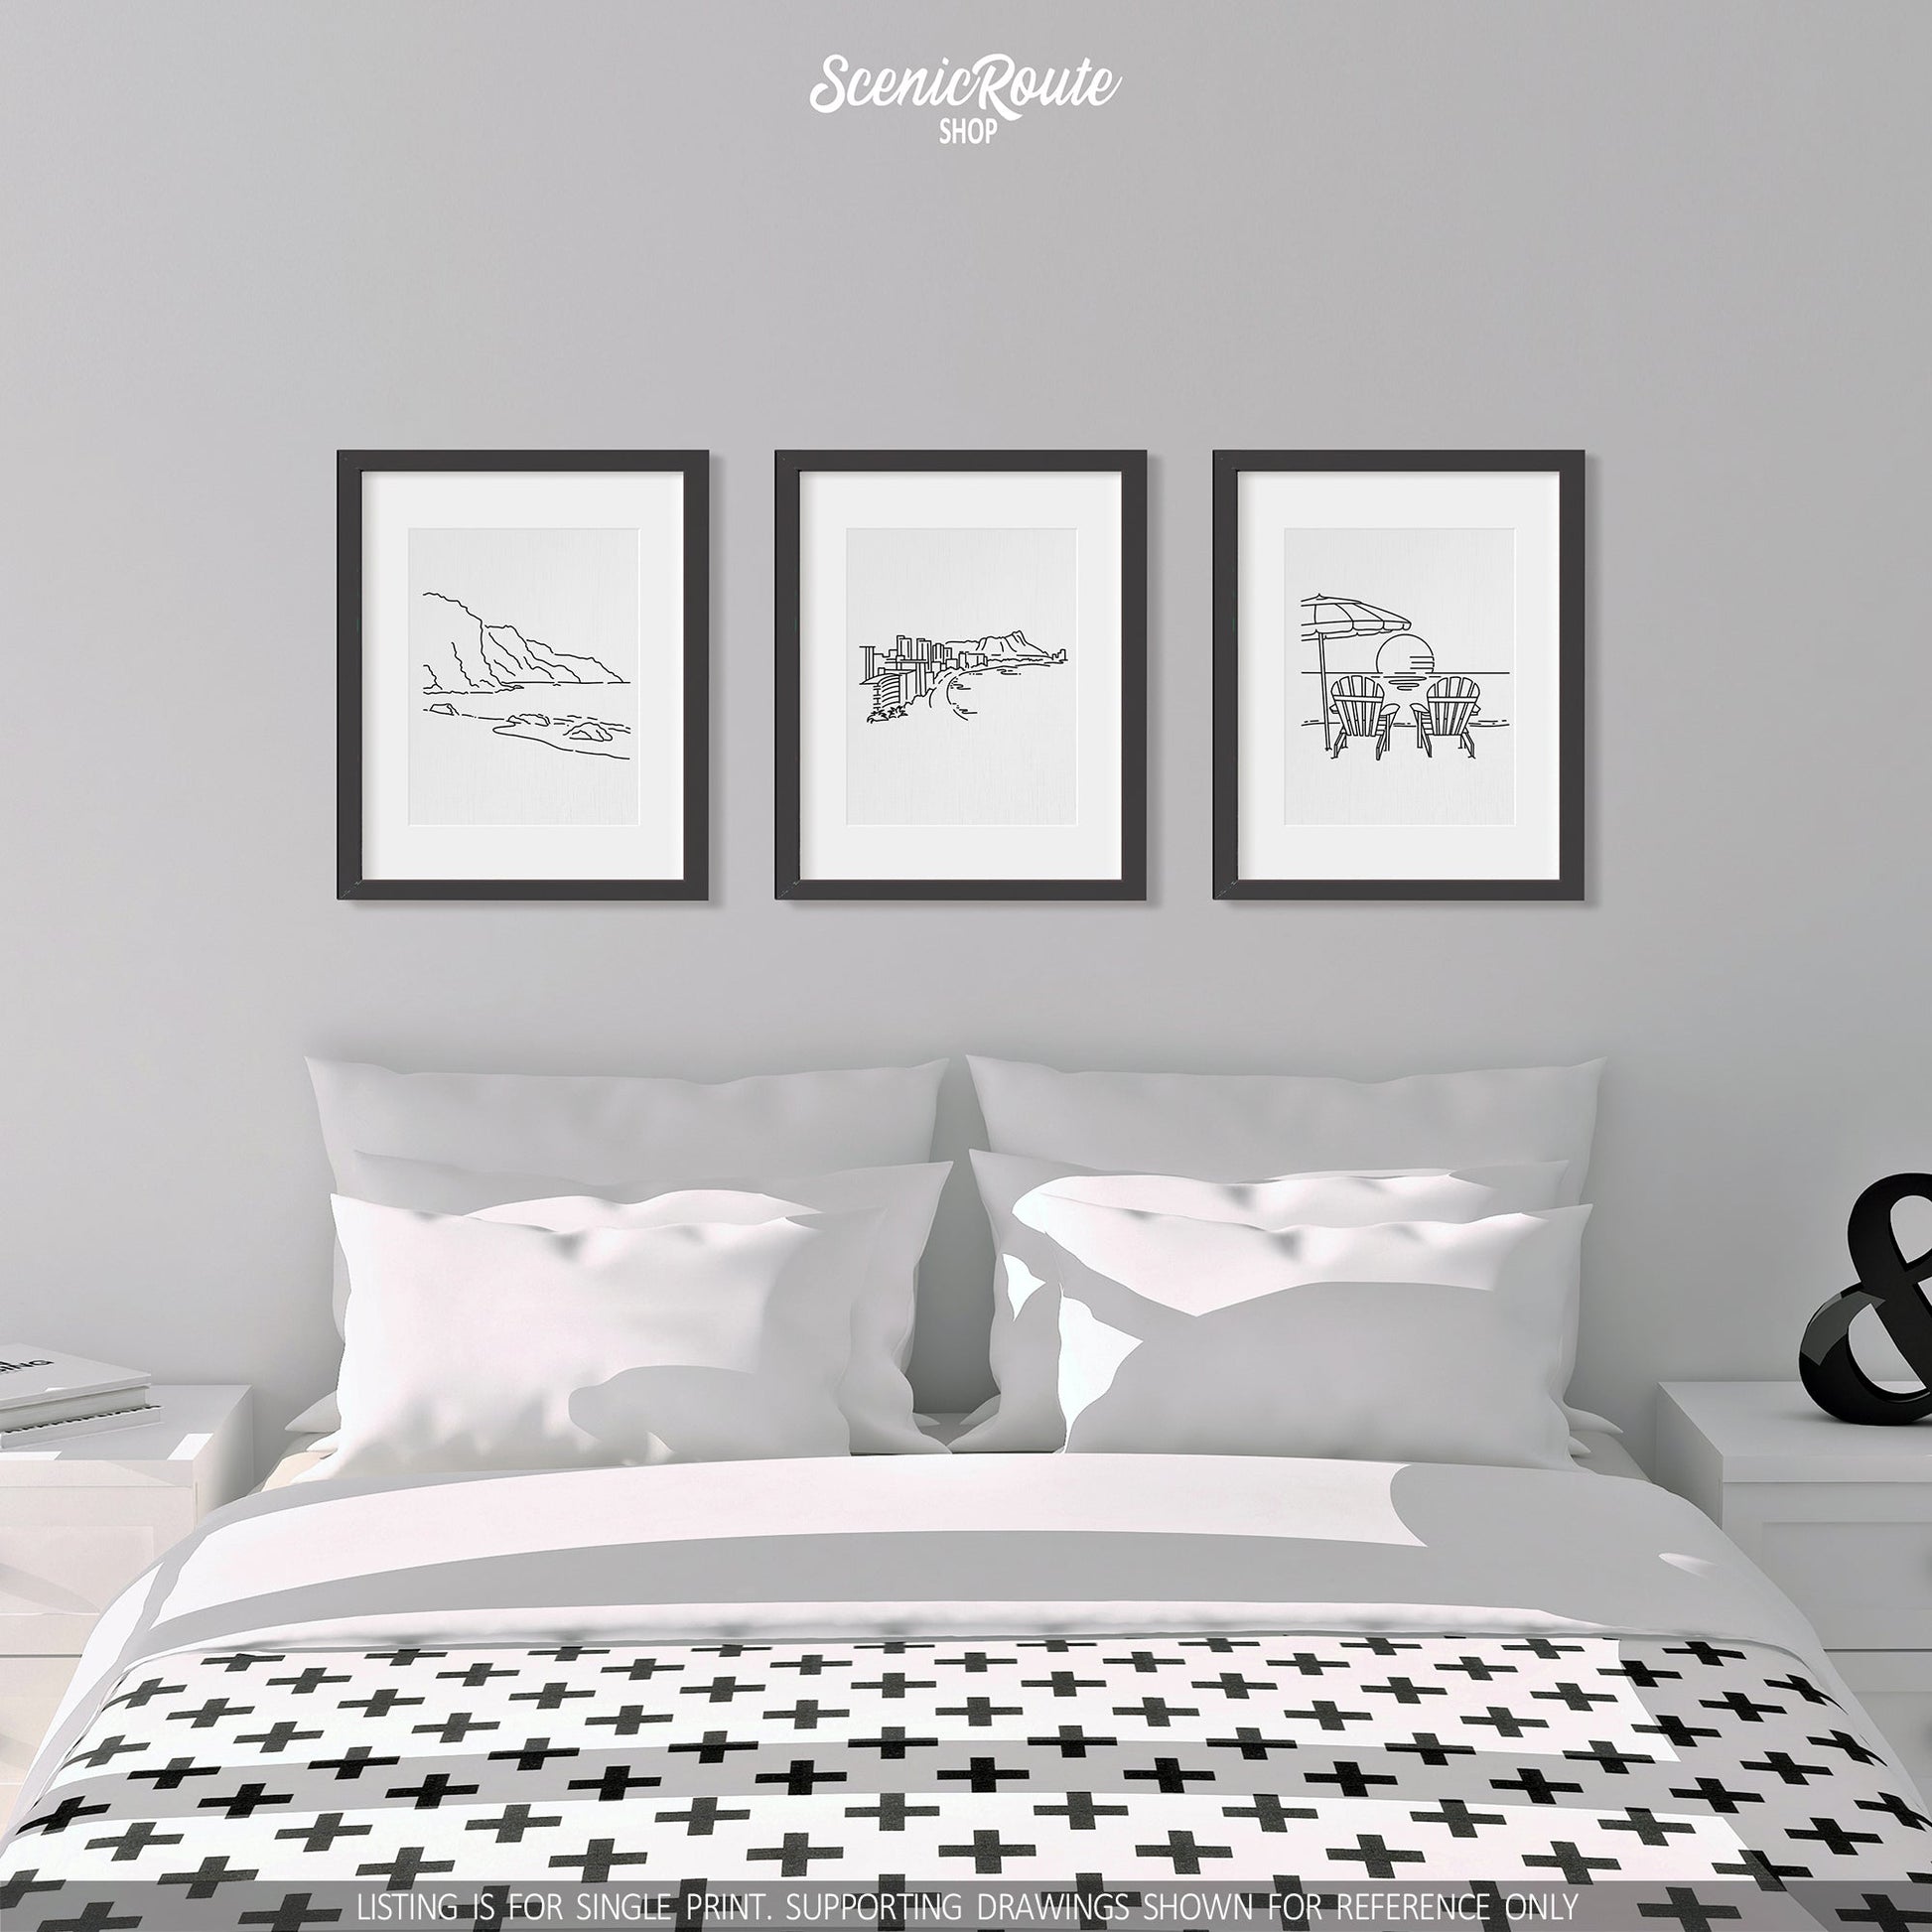 A group of three framed drawings on a white wall above a bed. The line art drawings include the NaPali Coast, Honolulu Skyline, and Adirondack Beach Chairs